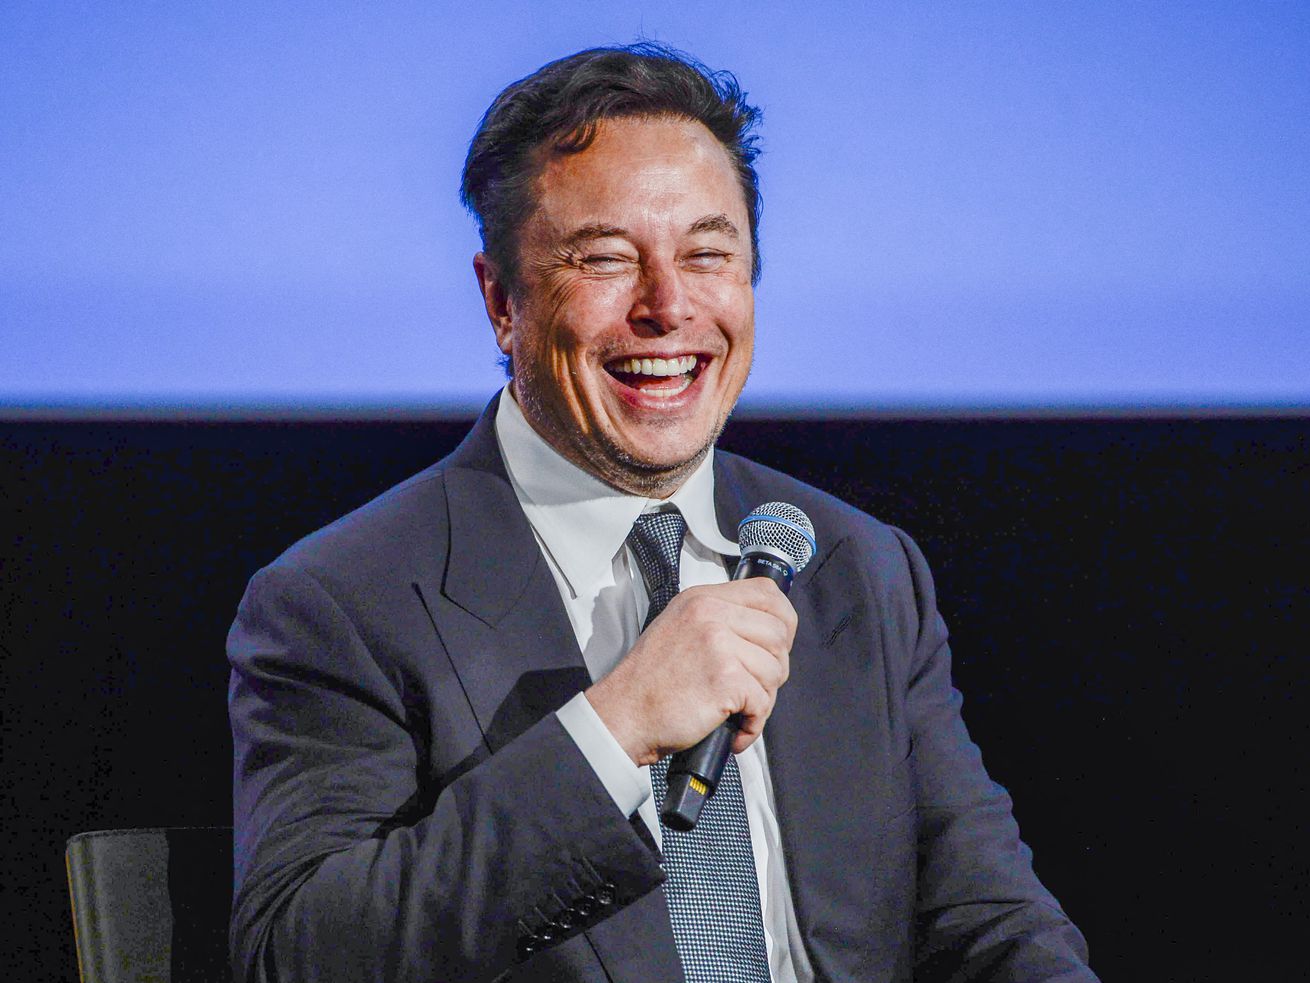 Elon Musk holding a microphone and laughing.